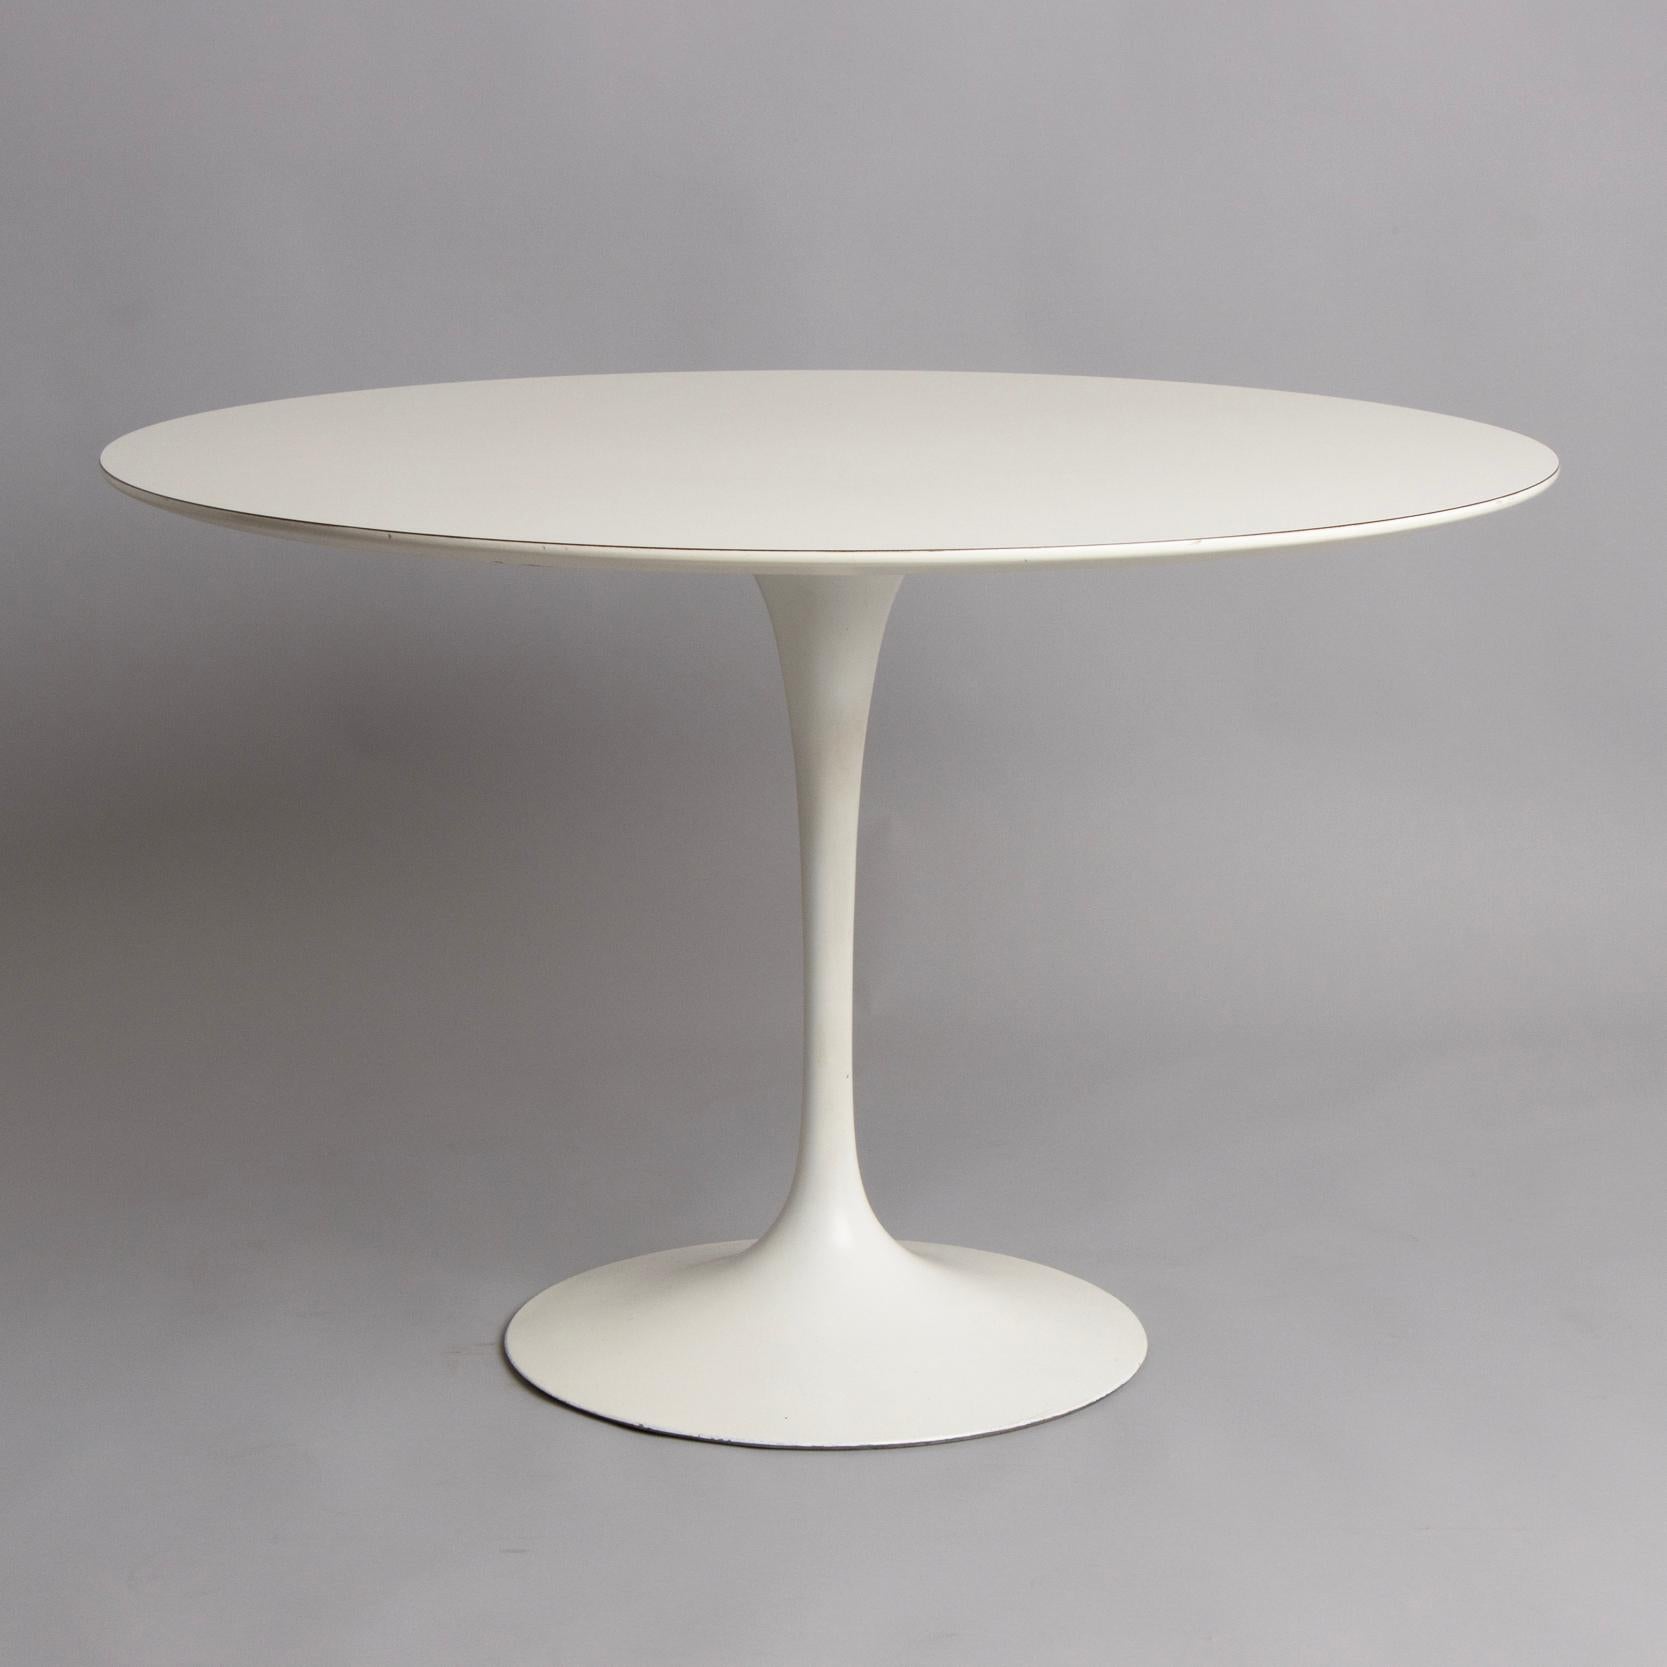 An original tulip table designed by Eero Saarinen and produced by Knoll International. The table has a laminate top and retains the maker's mark under the base. Excellent condition.